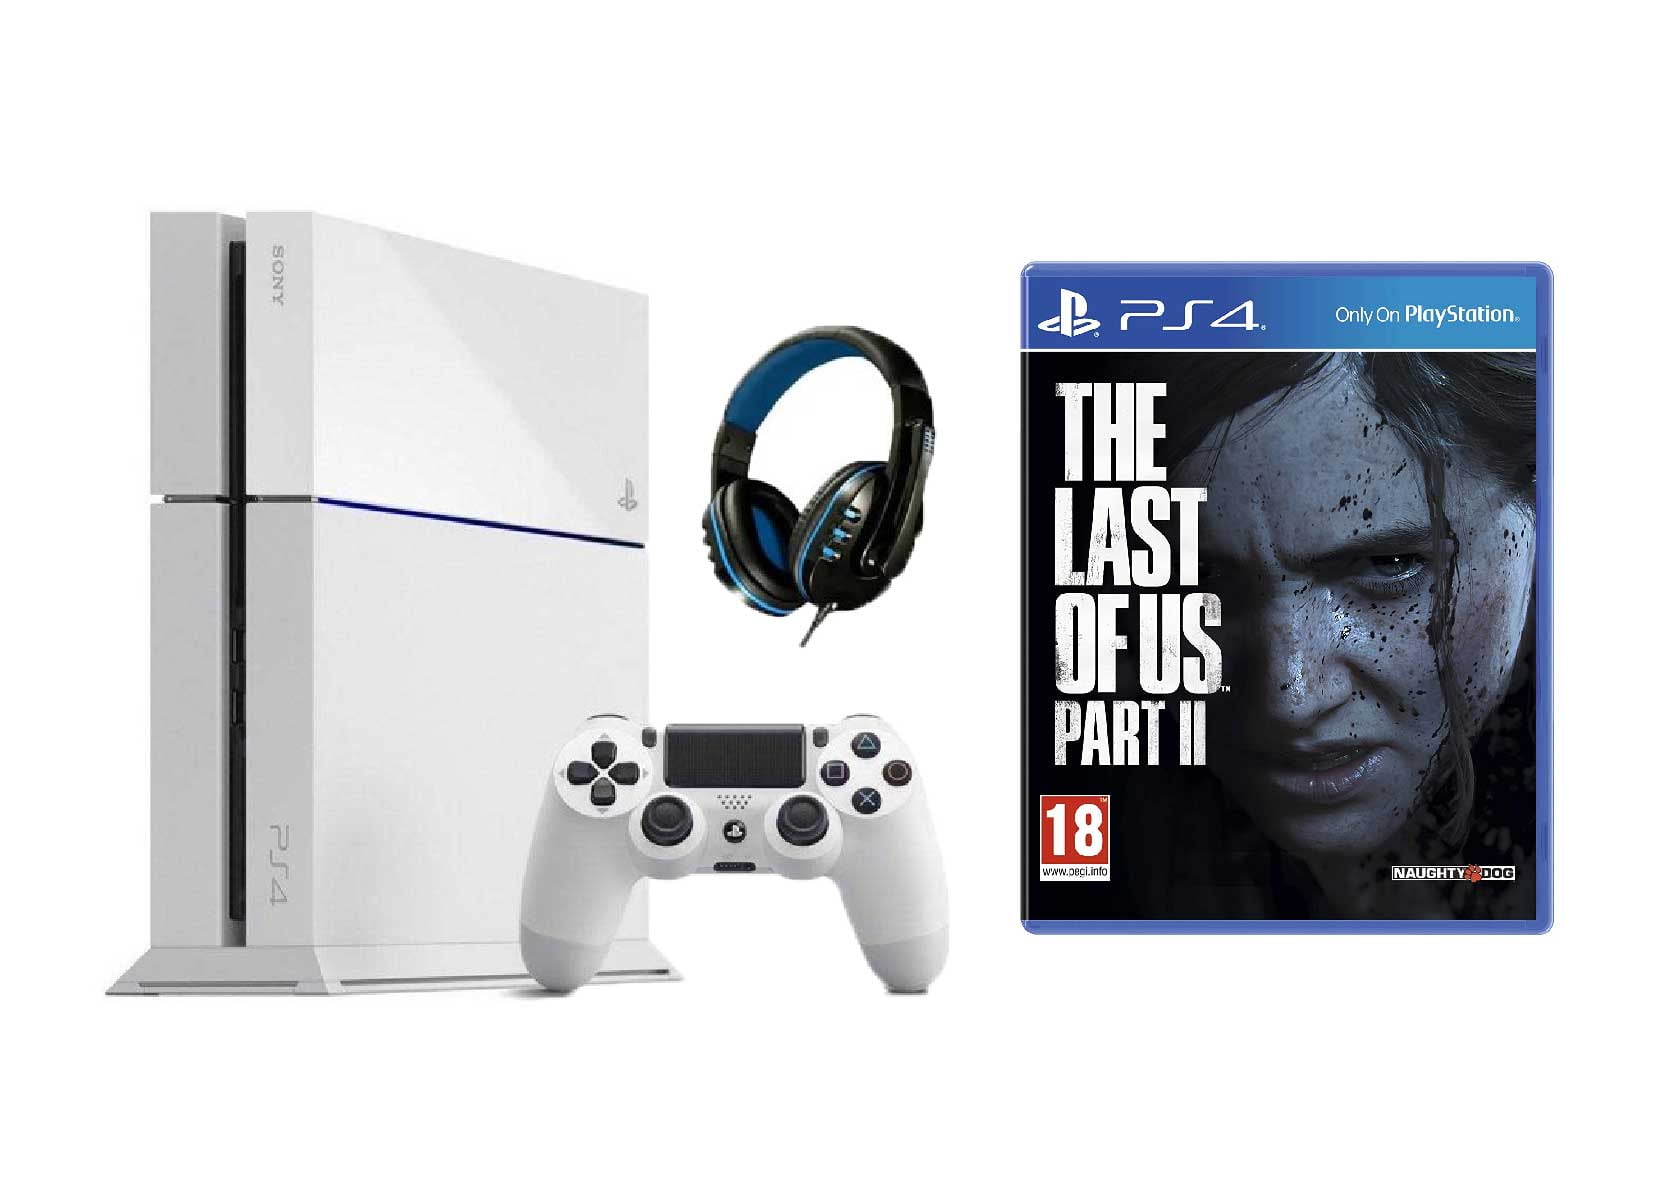 Sony PlayStation 4 500GB Gaming Console White with The Last of Us